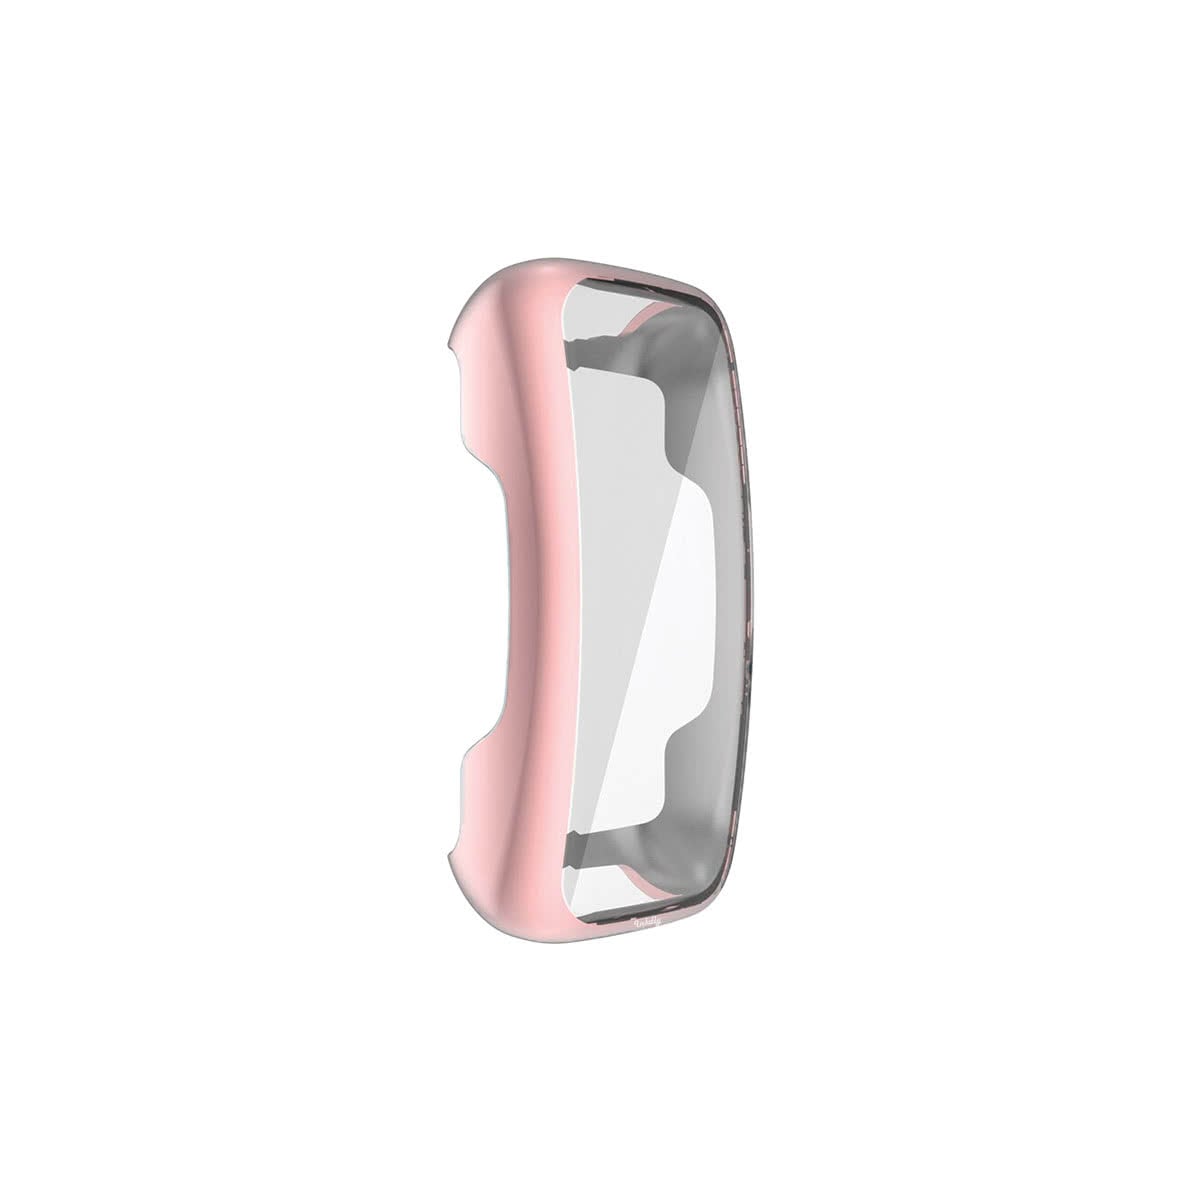 Slimfit Fitbit Inspire 2 Protective Case & Screen Protector Pink  